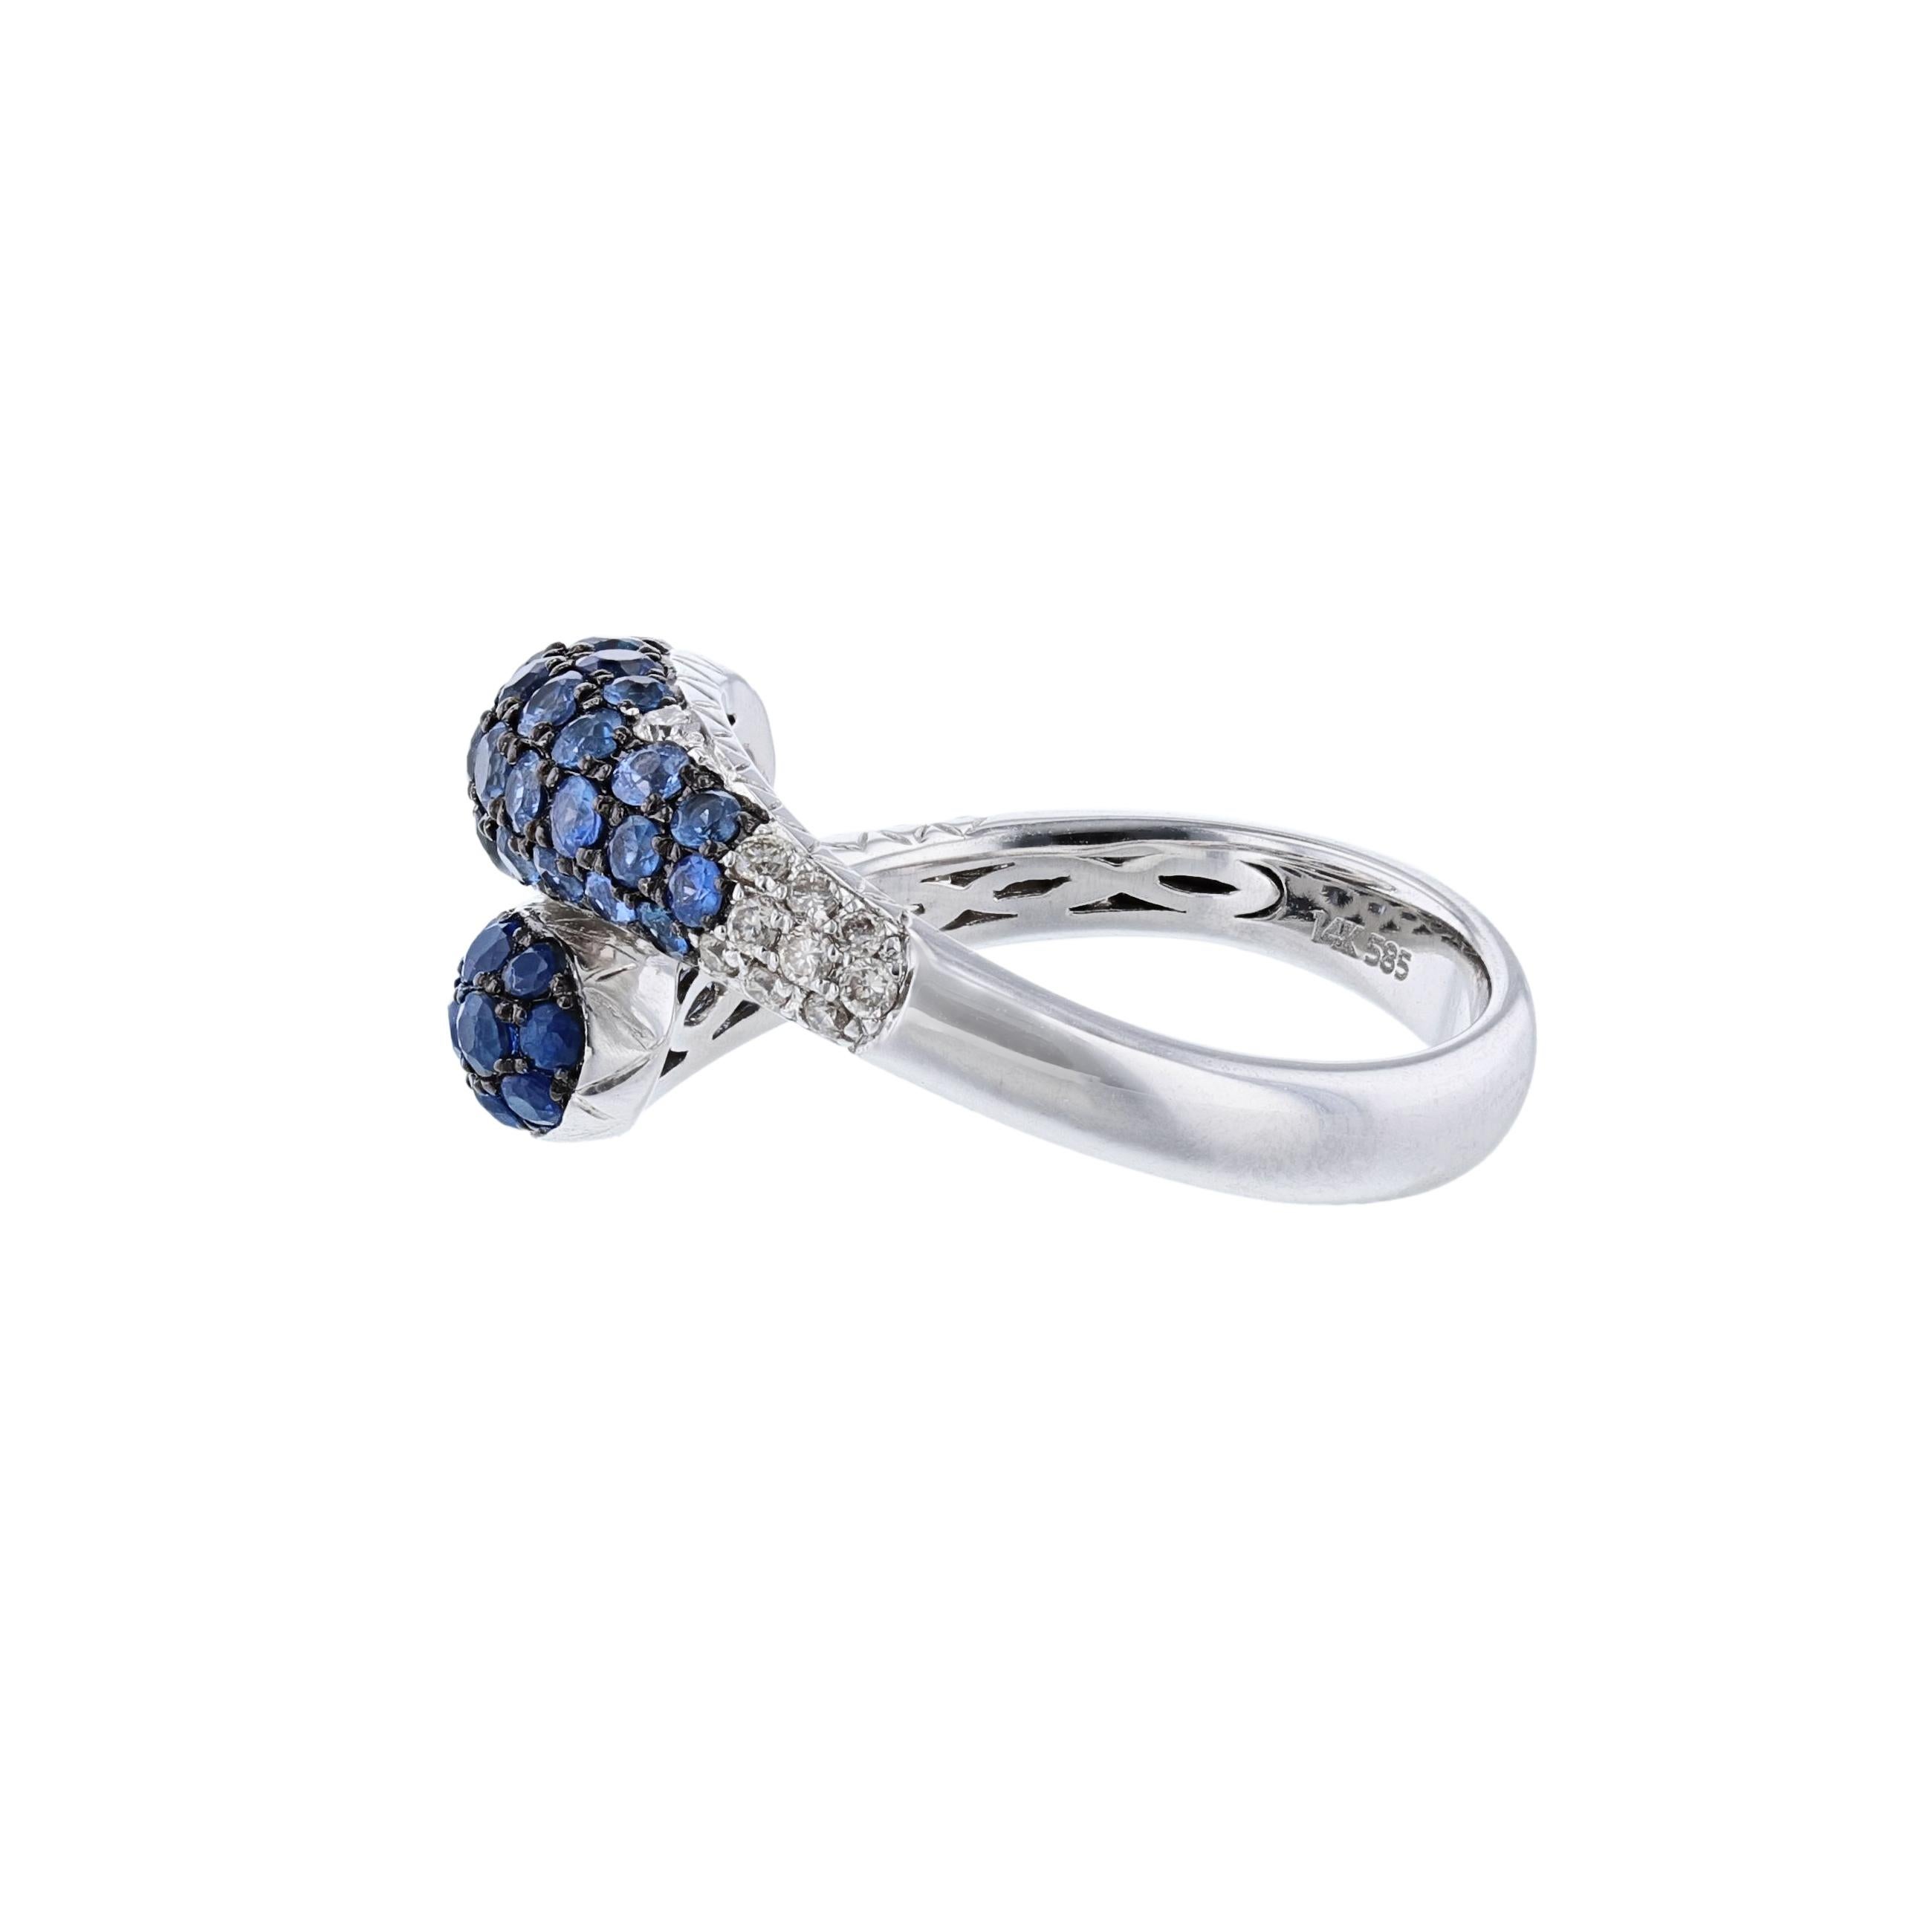 This ring is 14k white gold and features 52 blue sapphires weighing 1.52carats. Also includes 21 round cut diamonds weighing 0.18 carat. The ring has a a color grade (H) with a clarity grade of (SI2). All stones are pave' set 